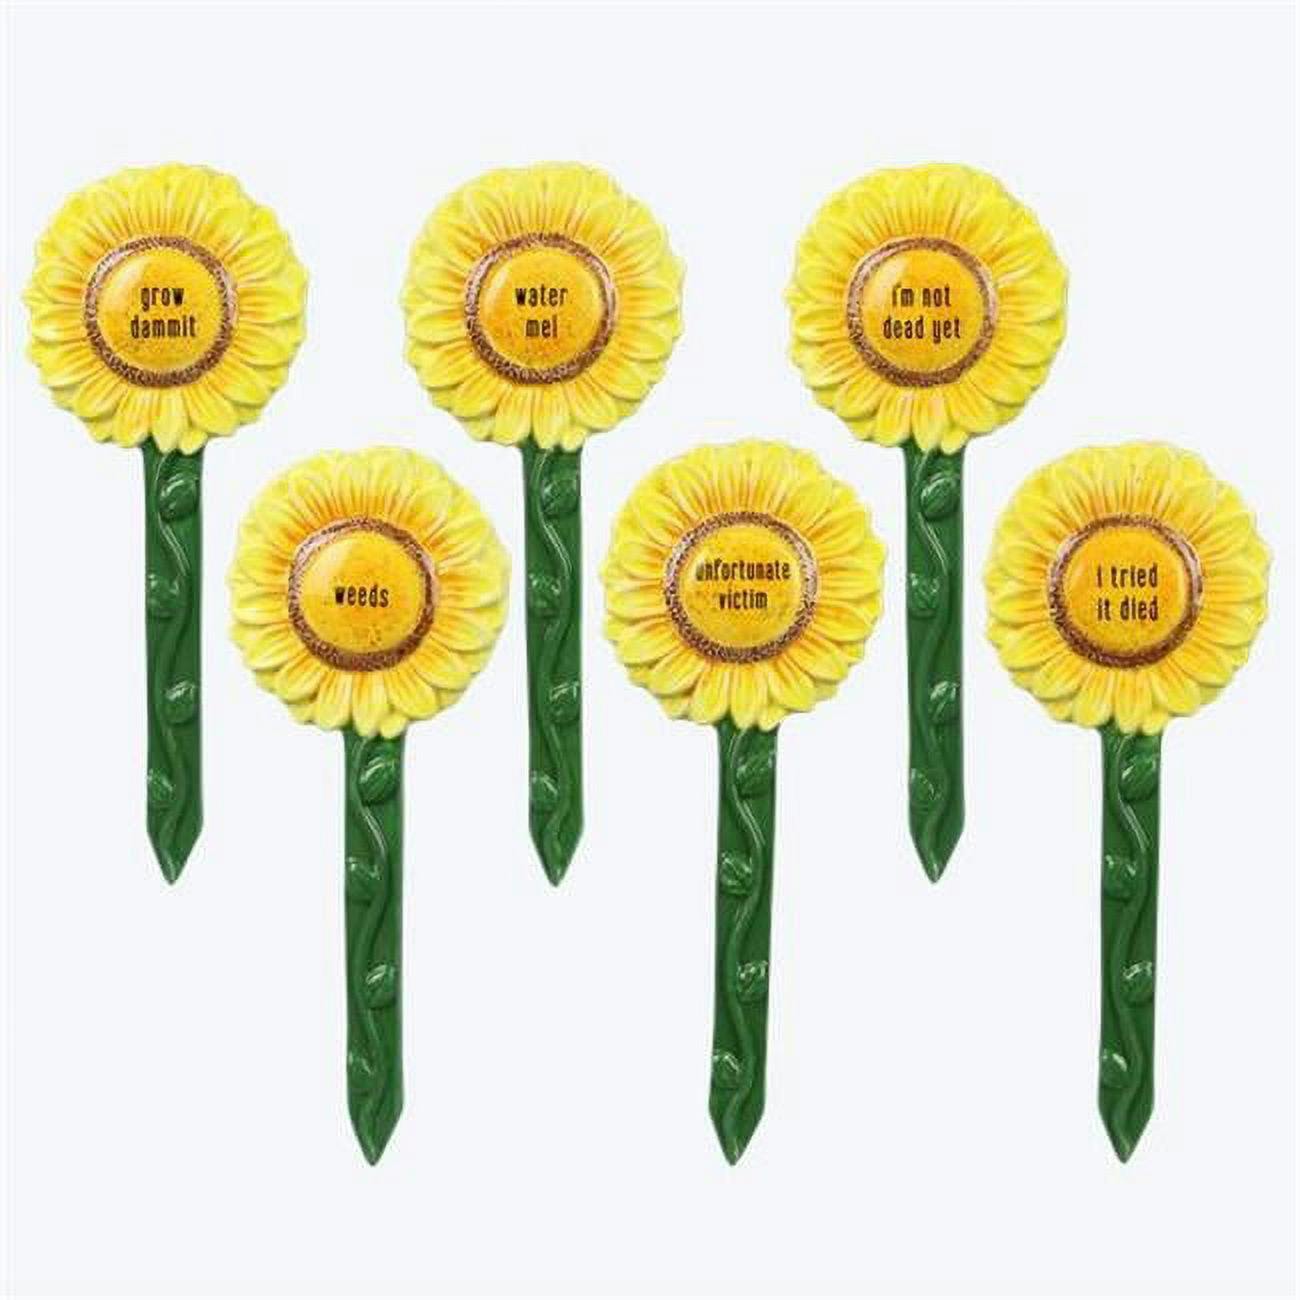 Lively Ceramic Sunflower Garden Stake Set - Assorted Colors, 6 Pieces